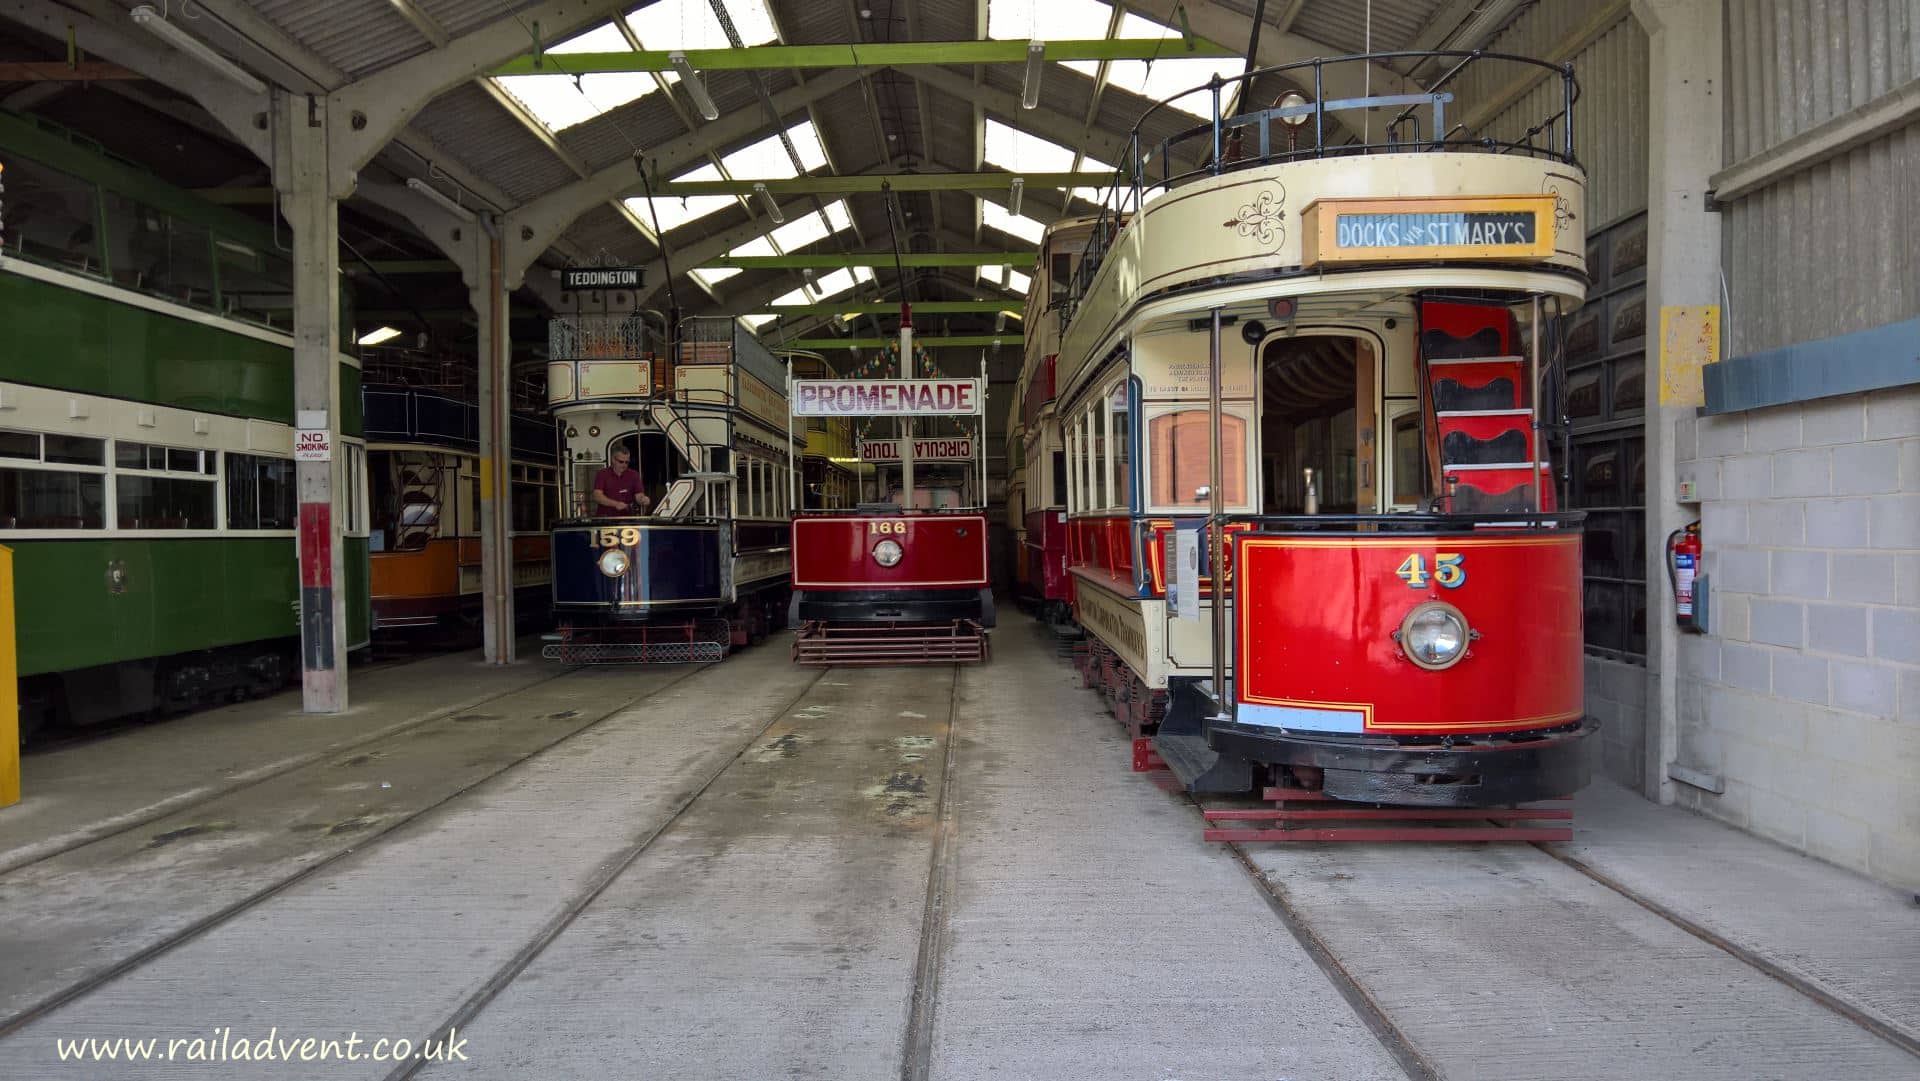 The sheds at Crich Tramway Village & Museum